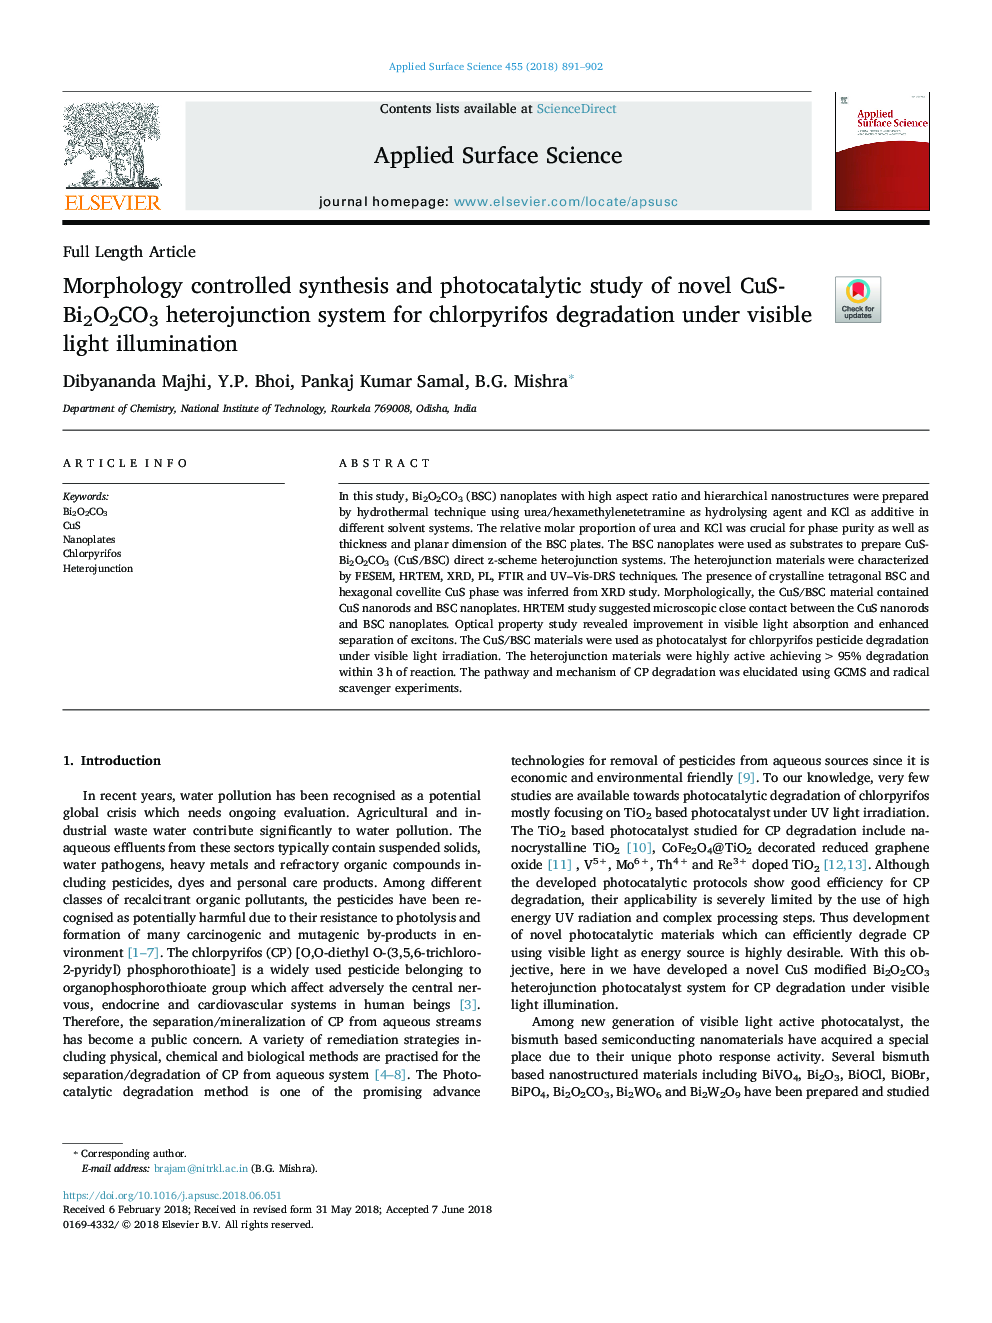 Morphology controlled synthesis and photocatalytic study of novel CuS-Bi2O2CO3 heterojunction system for chlorpyrifos degradation under visible light illumination